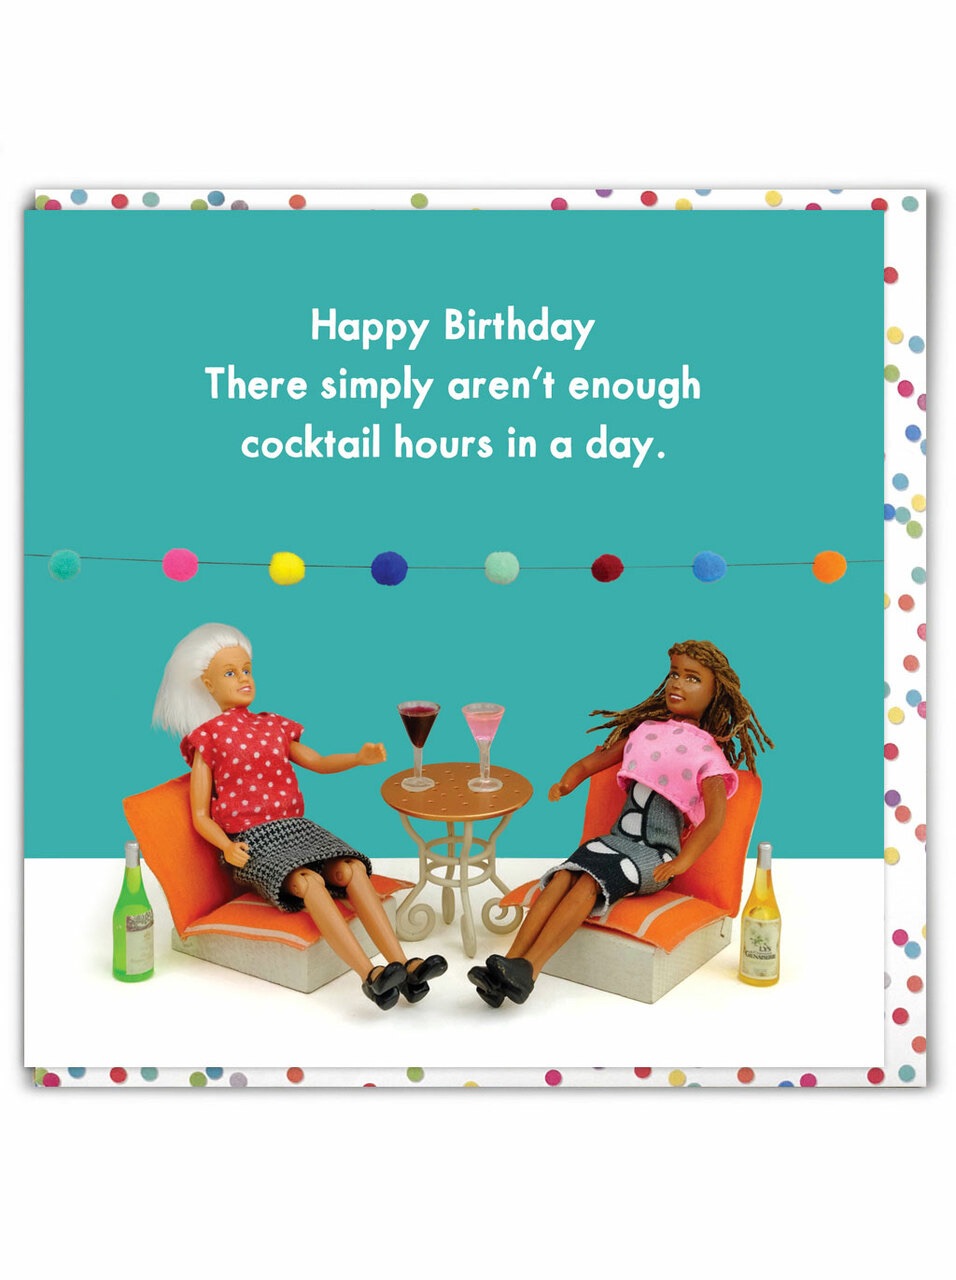 Brainbox Candy - Happy Birthday!  There sinply aren't enough cocktail hours